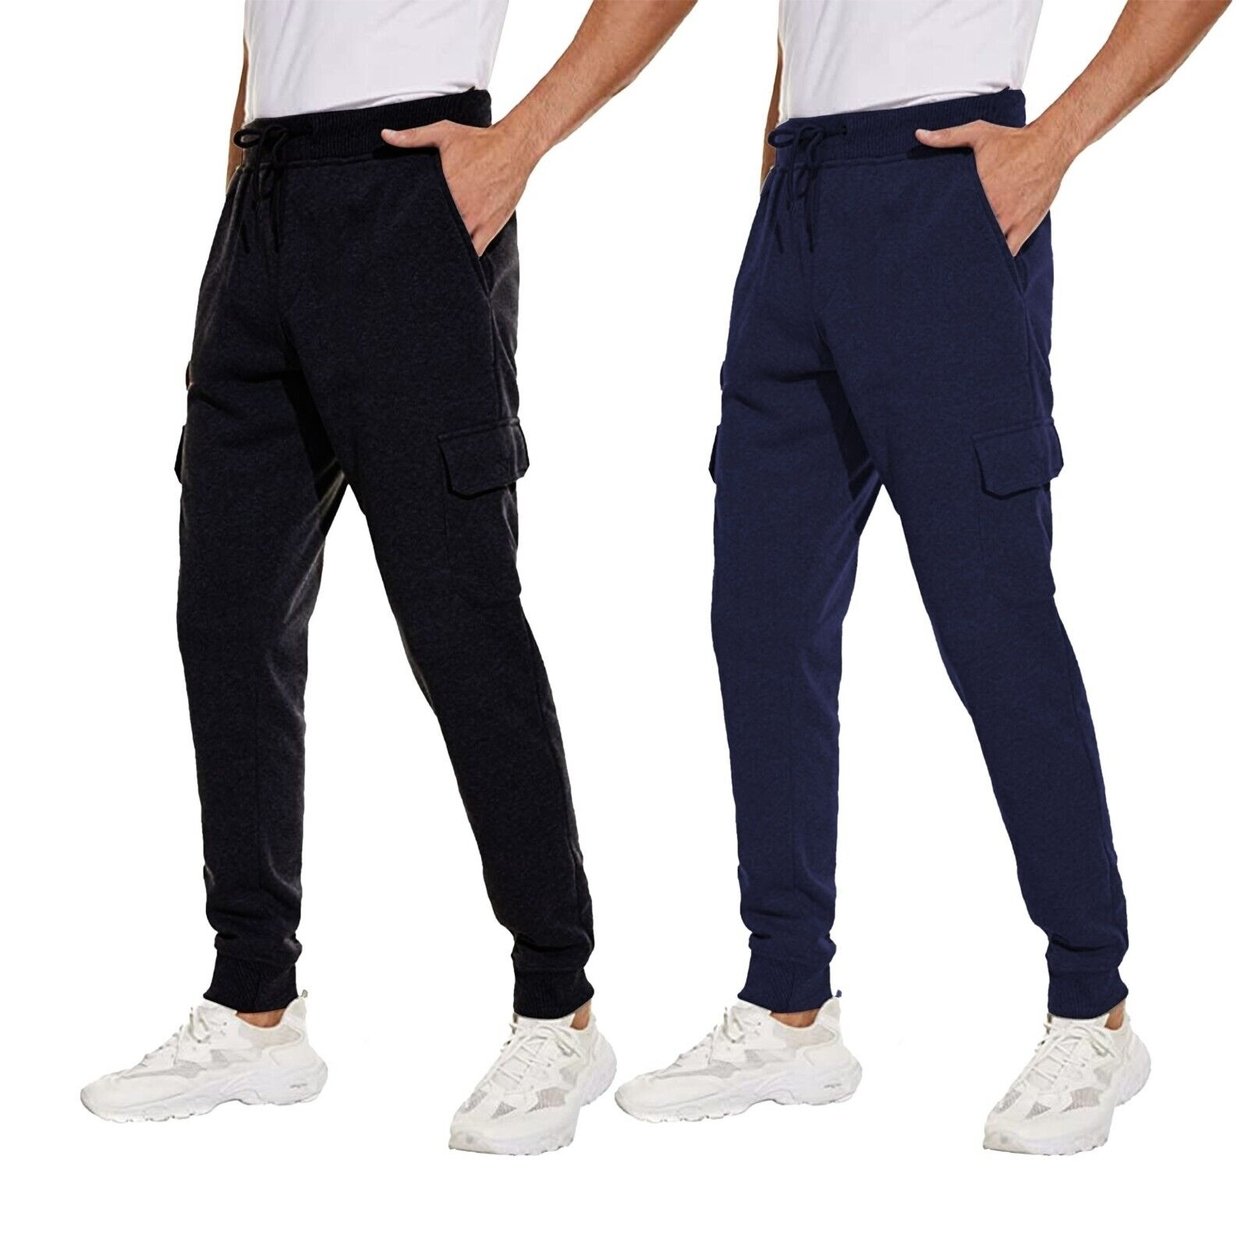 2-Pack Men's Ultra Soft Winter Warm Thick Athletic Sherpa Lined Jogger Pants - Black&navy, Small